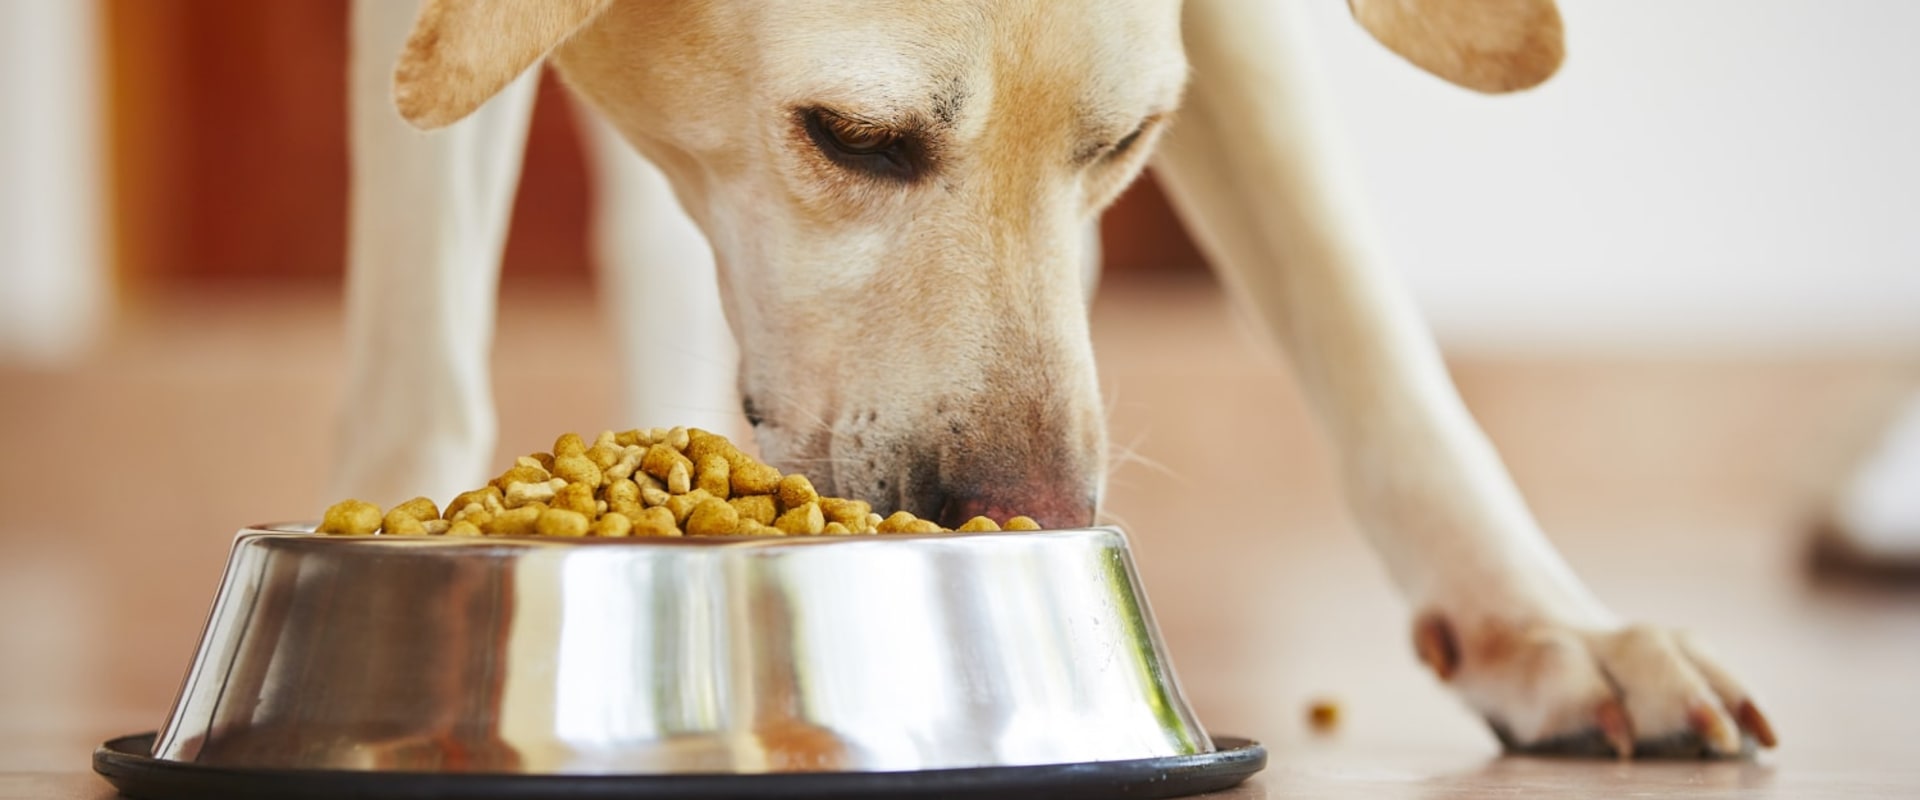 The Top Five Brands of Dry Dog Food Revealed